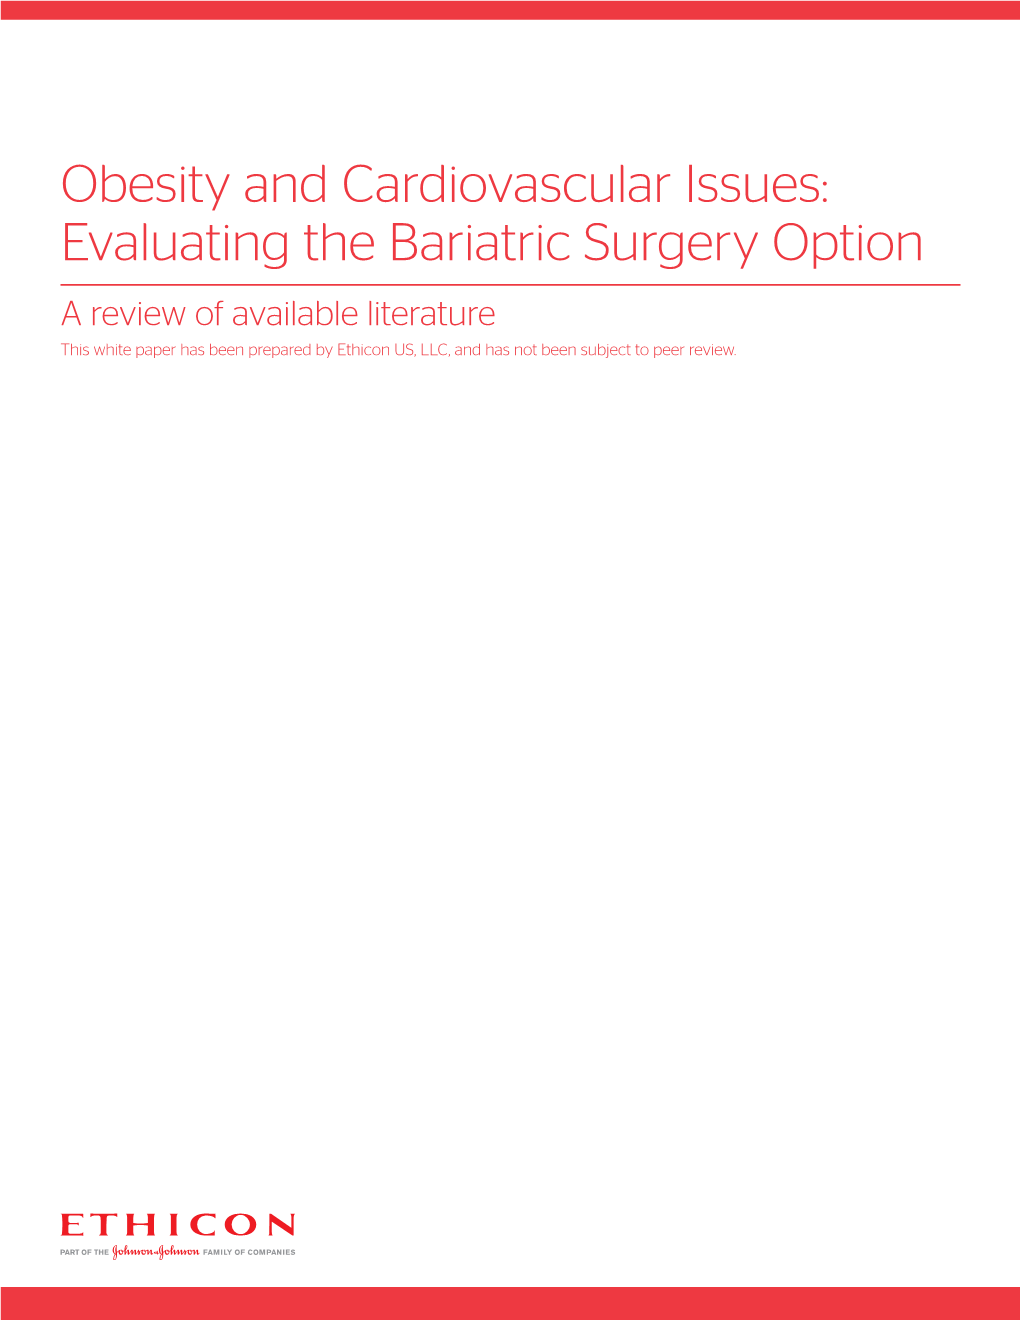 Obesity and Cardiovascular Issues: Evaluating the Bariatric Surgery